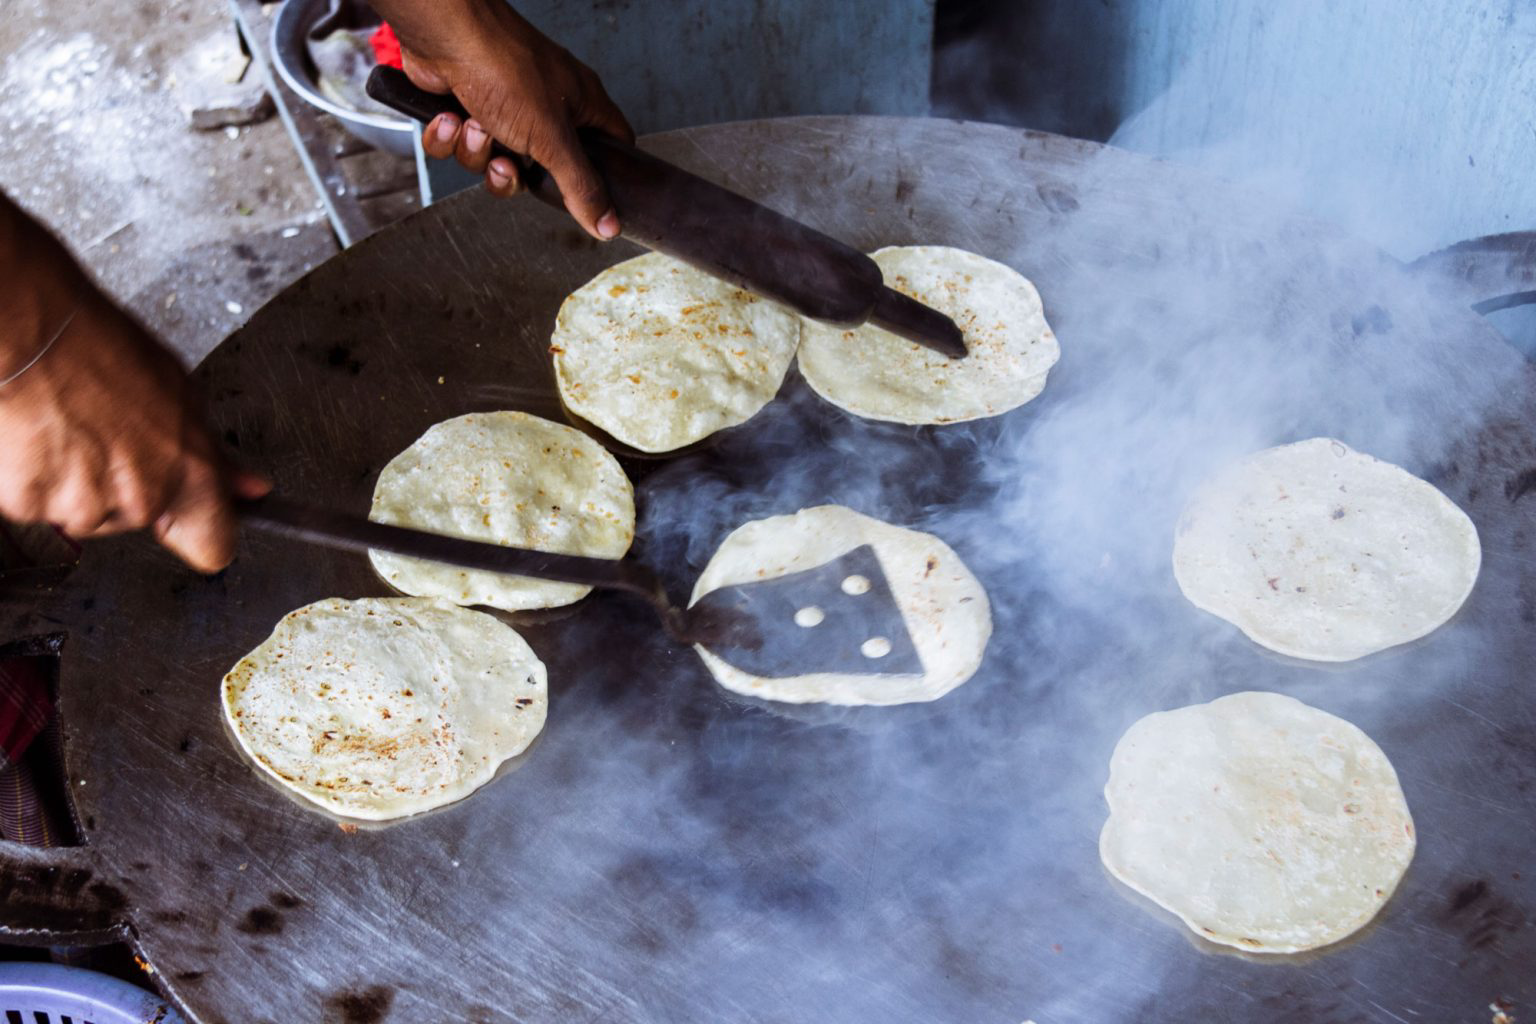 A person cooking small paratha flat bread.